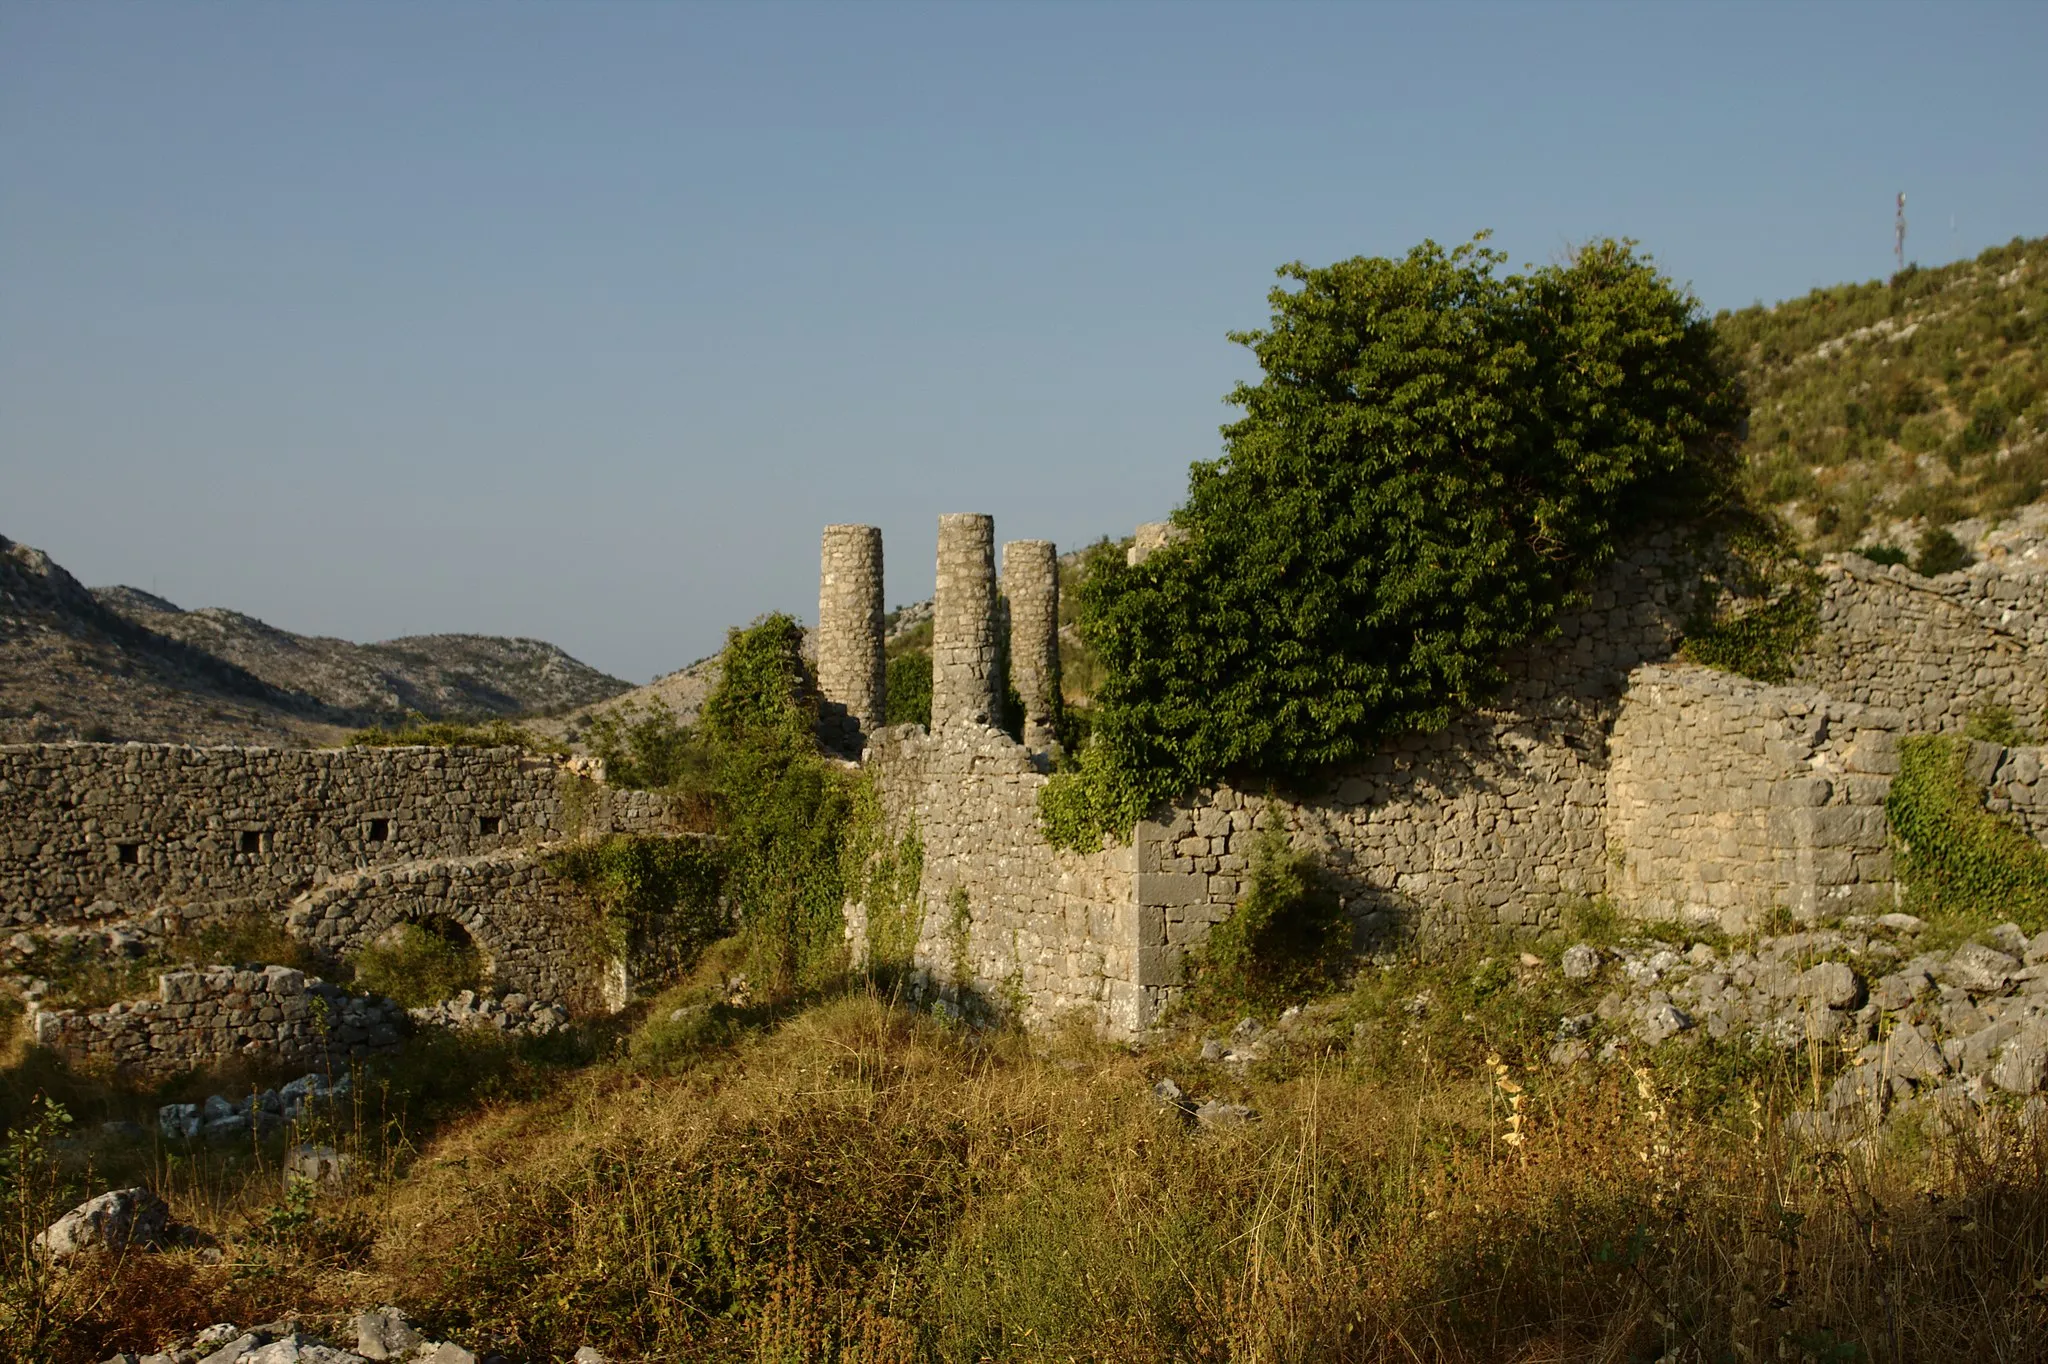 Photo showing: Remainings of a fortress near the town of Hutovo, Bosnia and Herzegovina